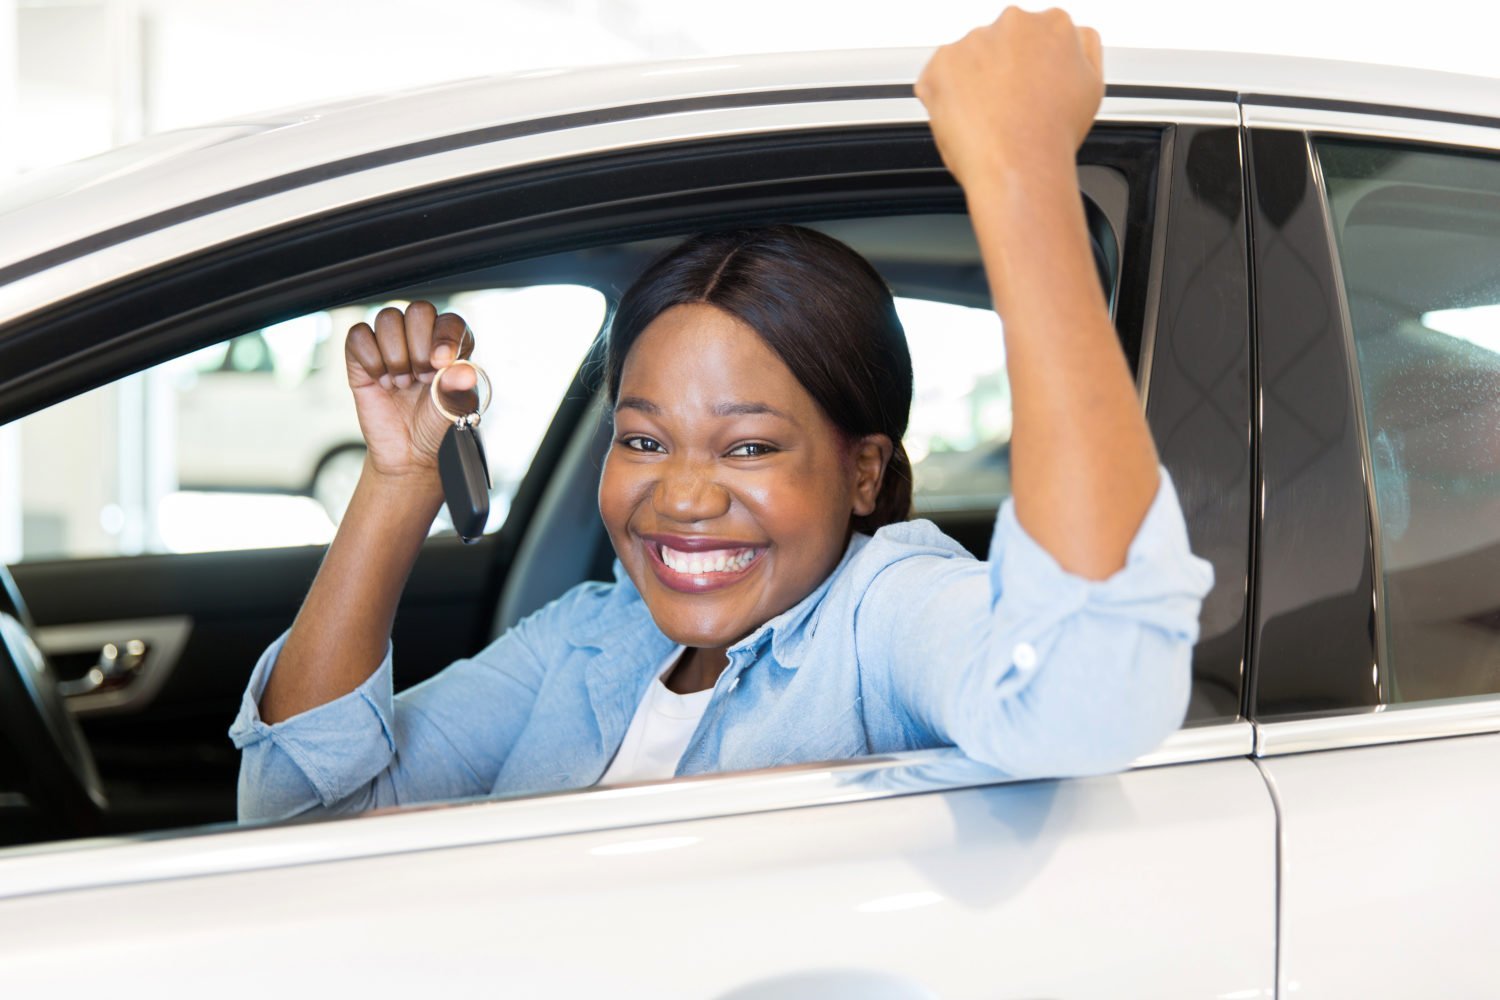 Itâs a Great Time to Buy a Used Car â Just Take These 5 ...